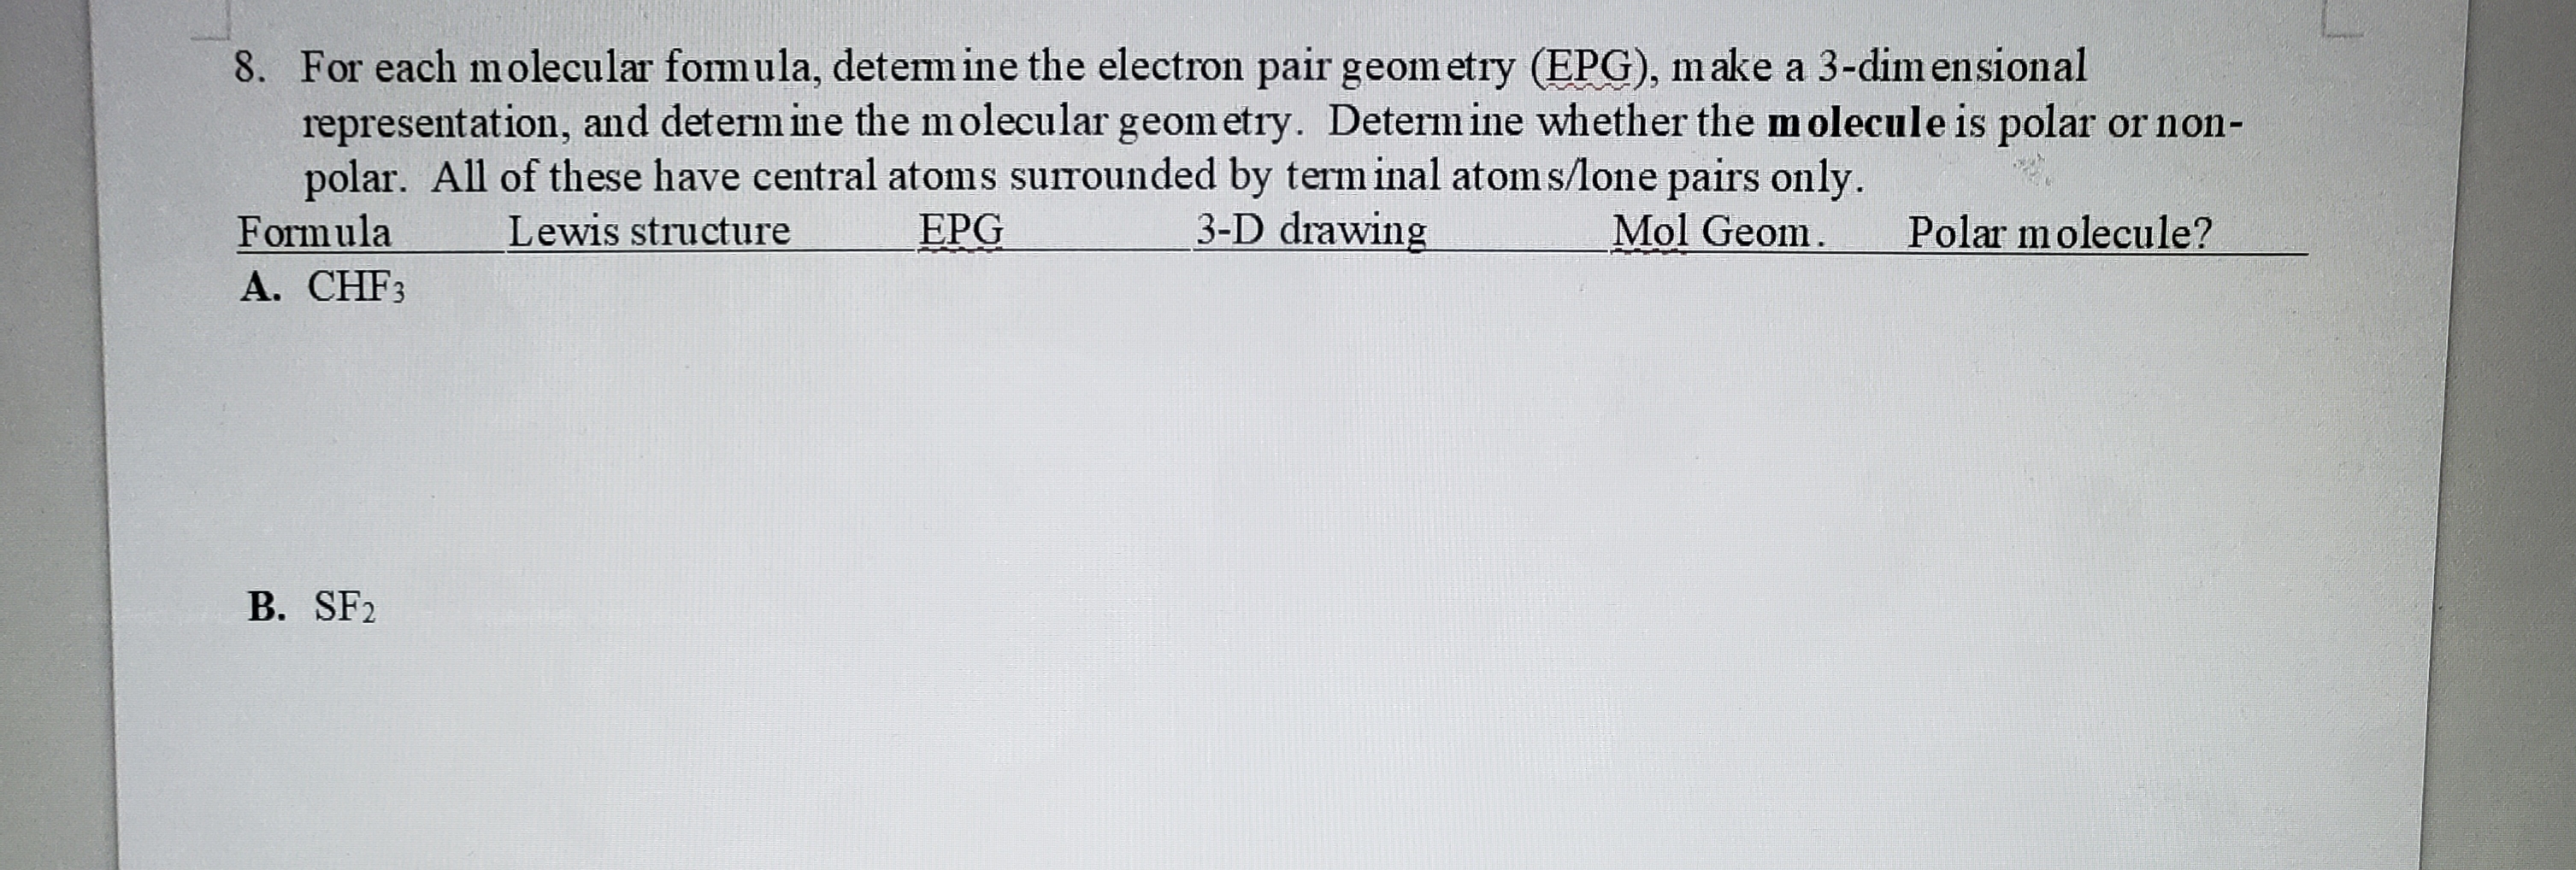 8. For each molecular fomula, detem ine the electron pair geom etry (EPG), make a 3-dimensional
representation, and determ ine the molecular geometry. Determine whether the molecule is polar or non-
polar. All of these have central atoms surounded by term inal atom s/one pairs only.
Formula
A. CHF3
Lewis structure
EPG
3-D drawing
Mol Geom.
Polar molecule?
B. SF2
